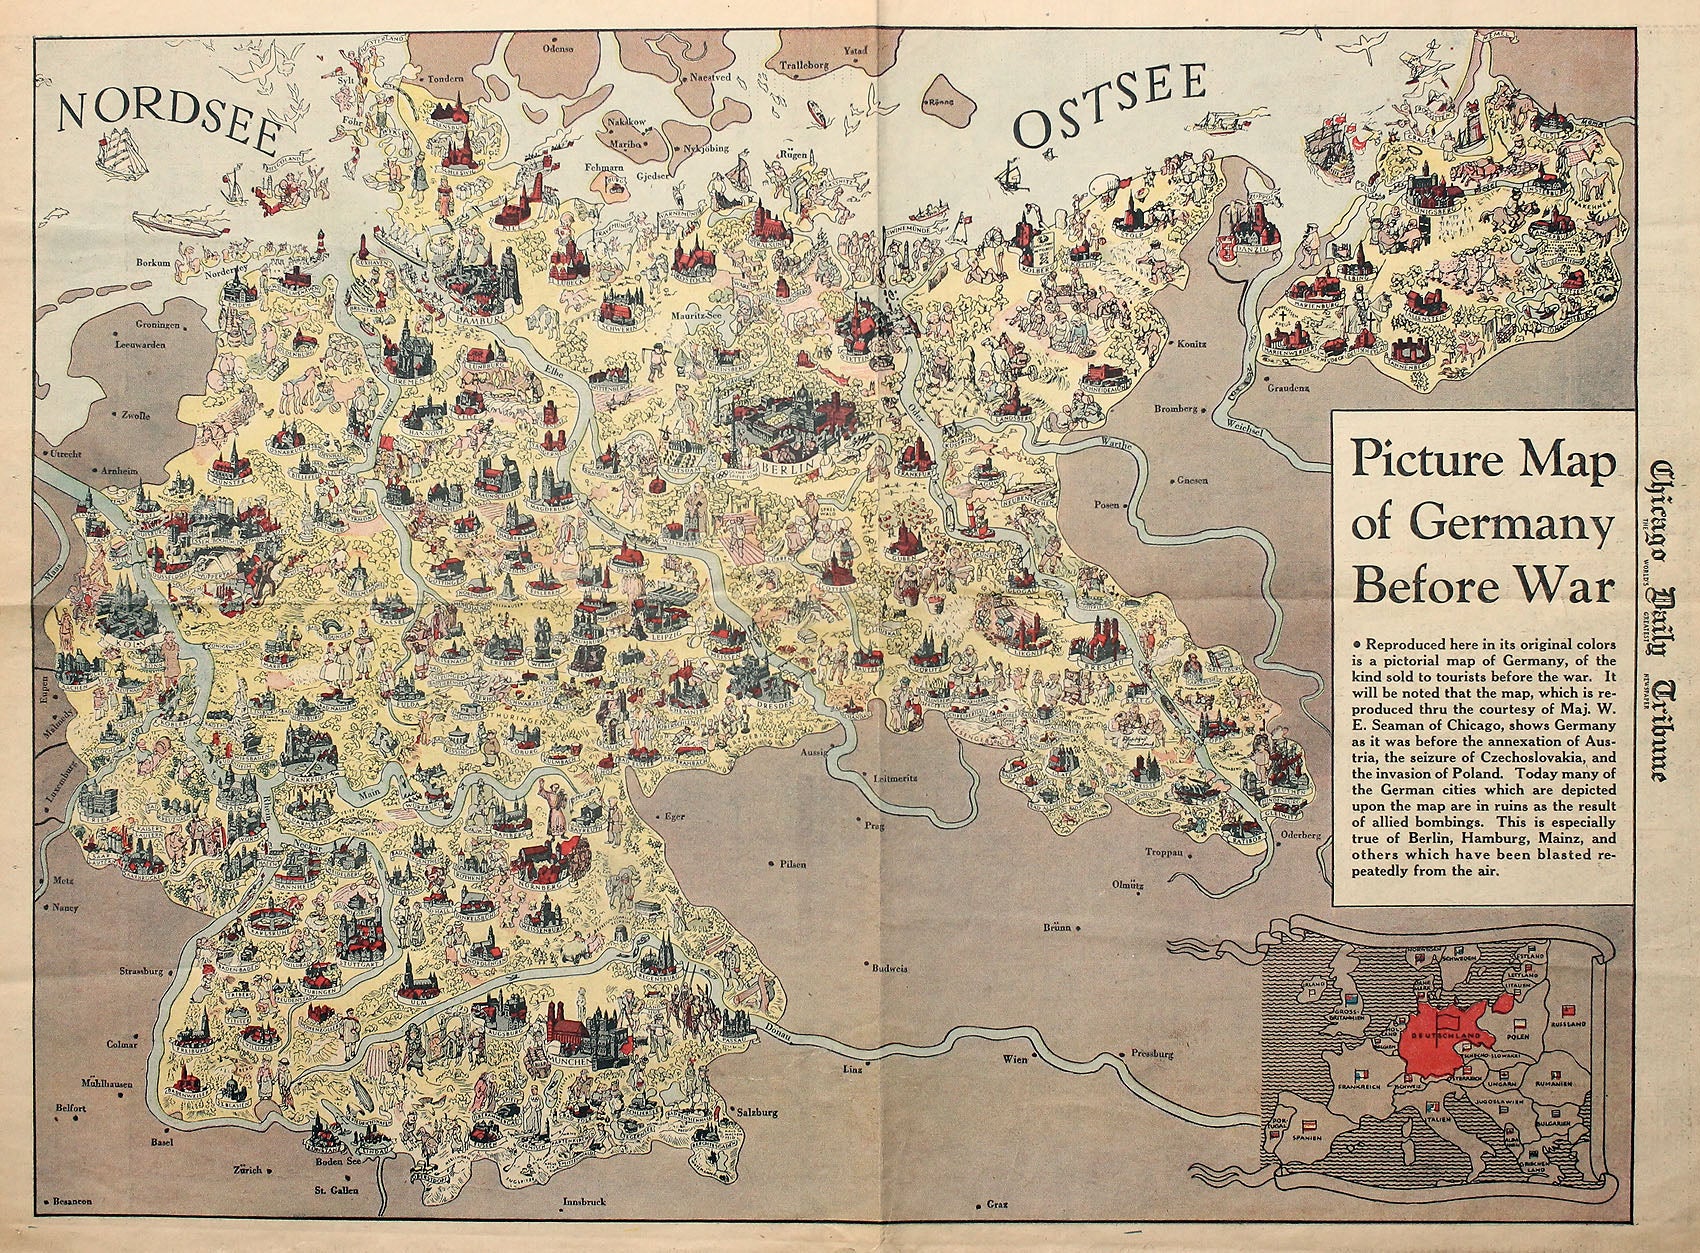 (WWII - Germany) Picture Map of Germany